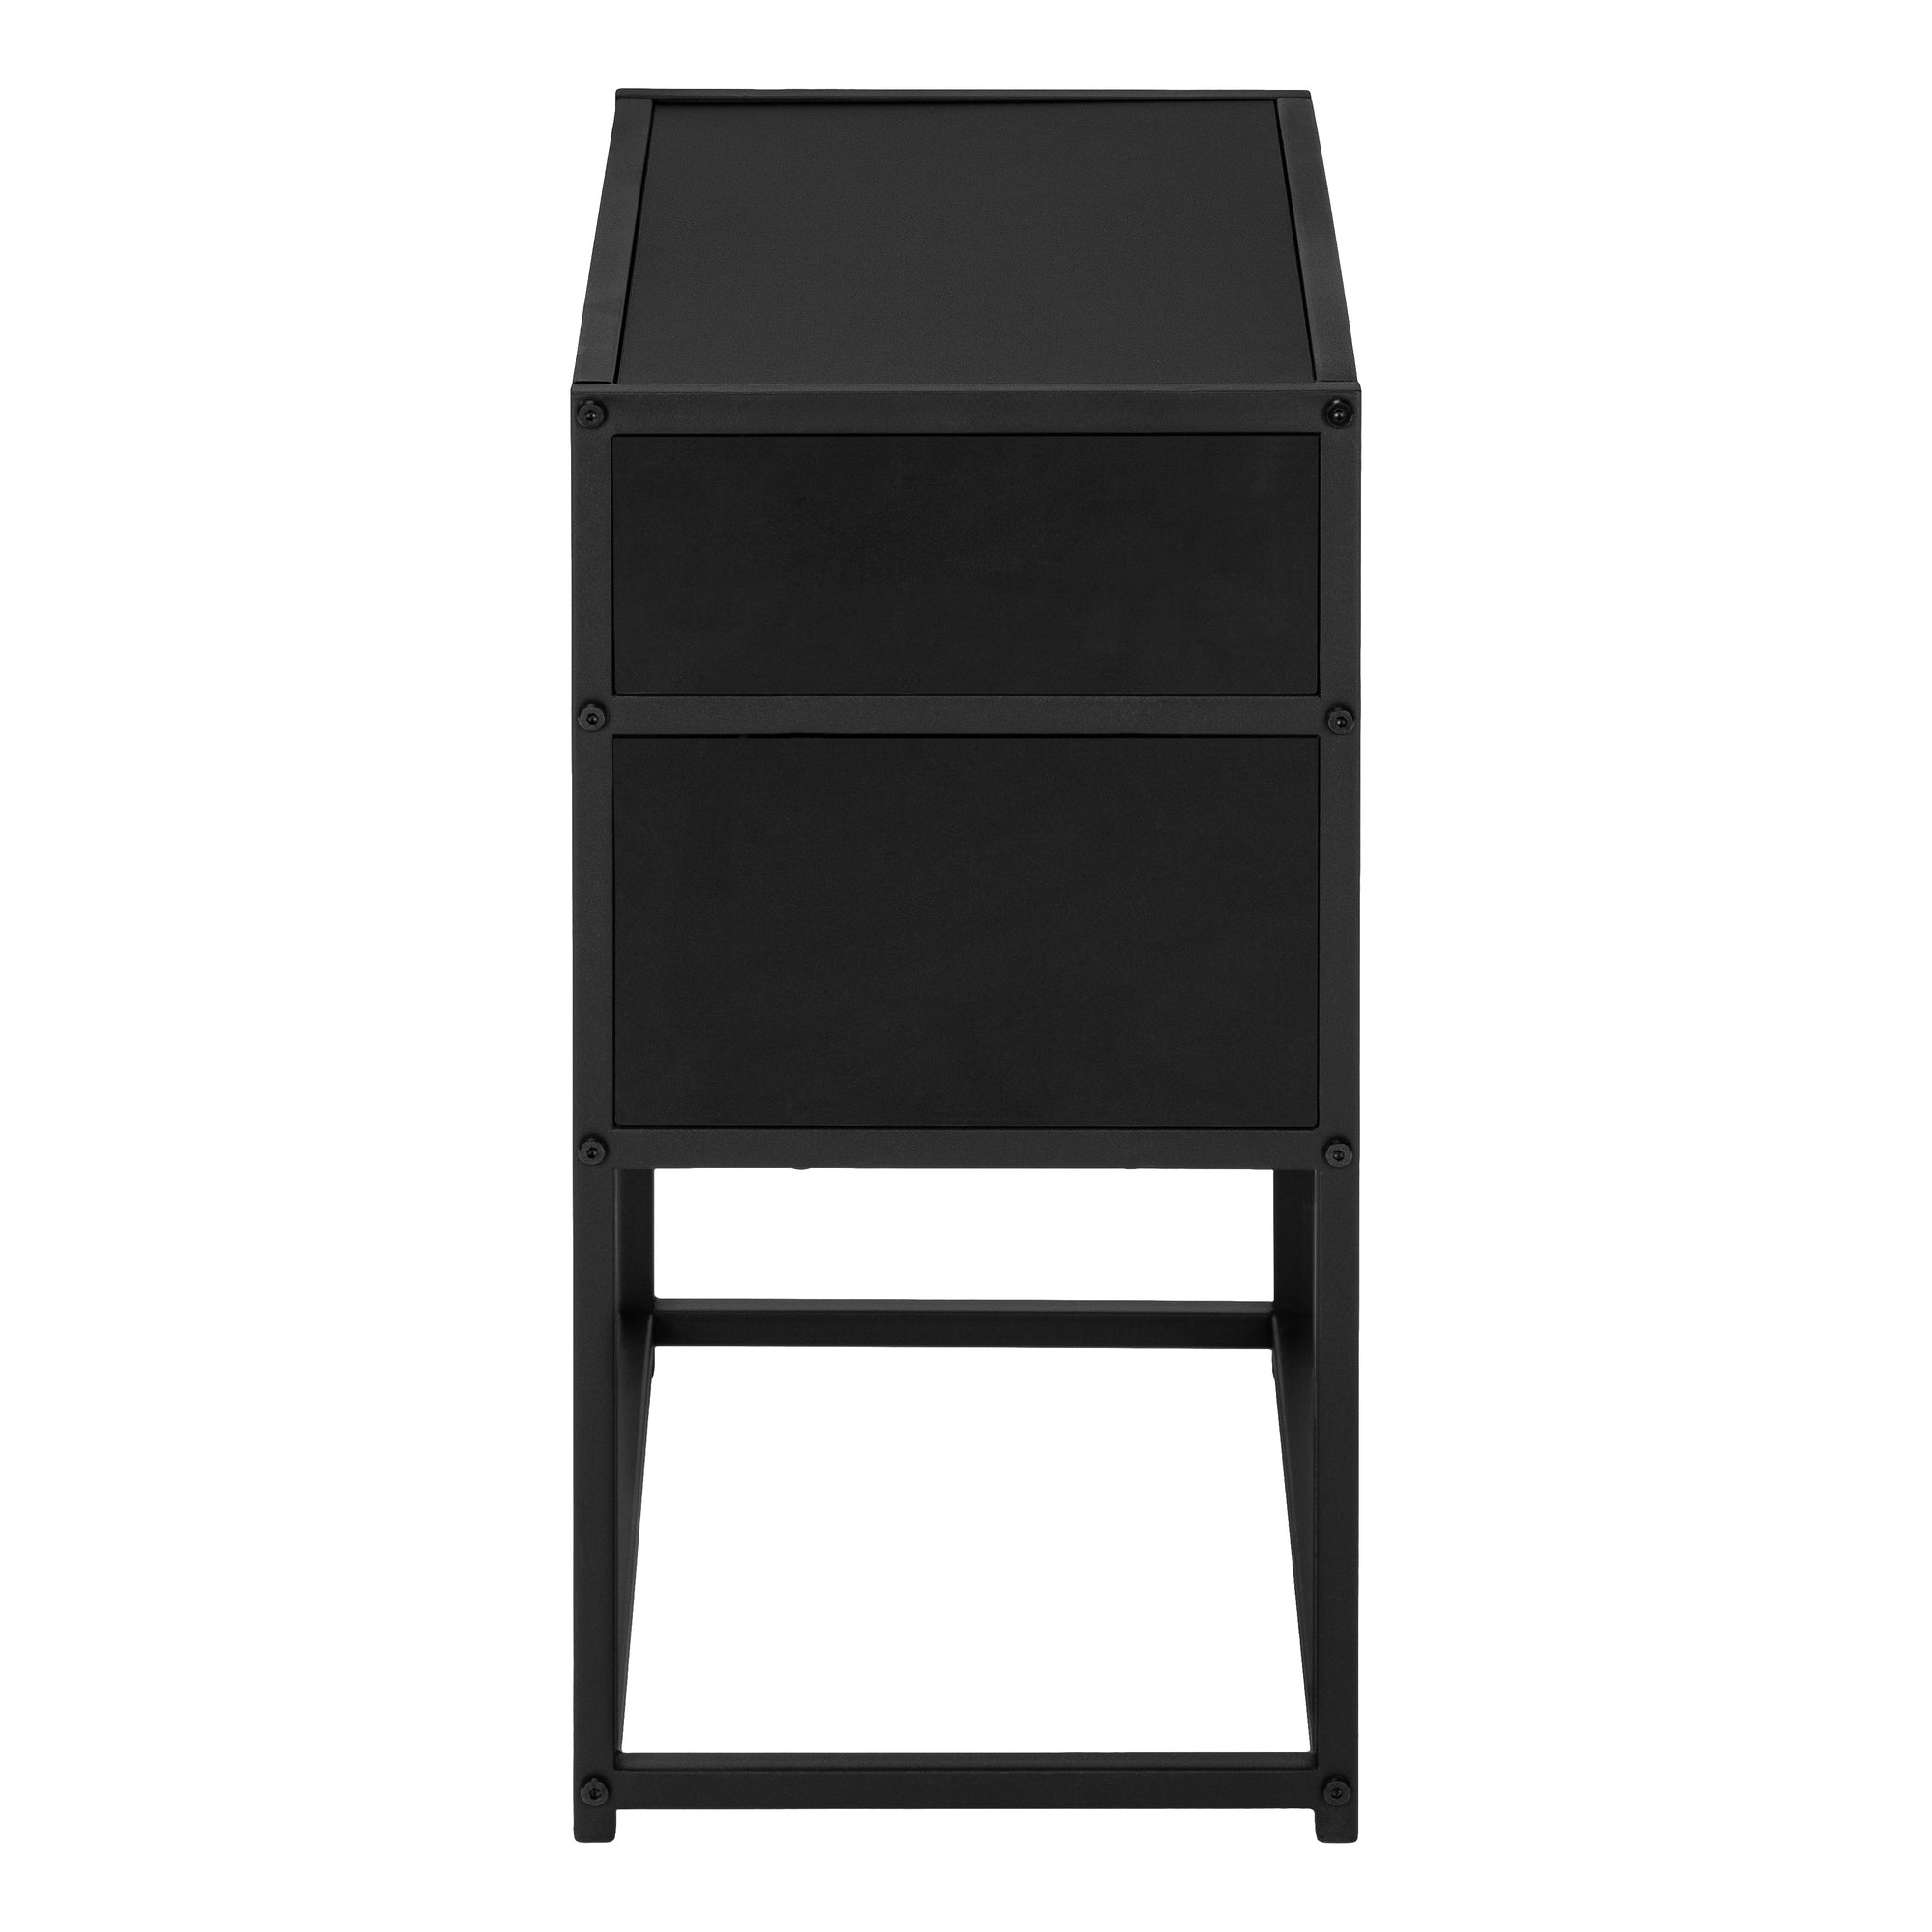 MN-113505    Accent Table, Side, End, Nightstand, Lamp, Living Room, Bedroom, Metal Frame, Laminate, Black, Contemporary, Modern